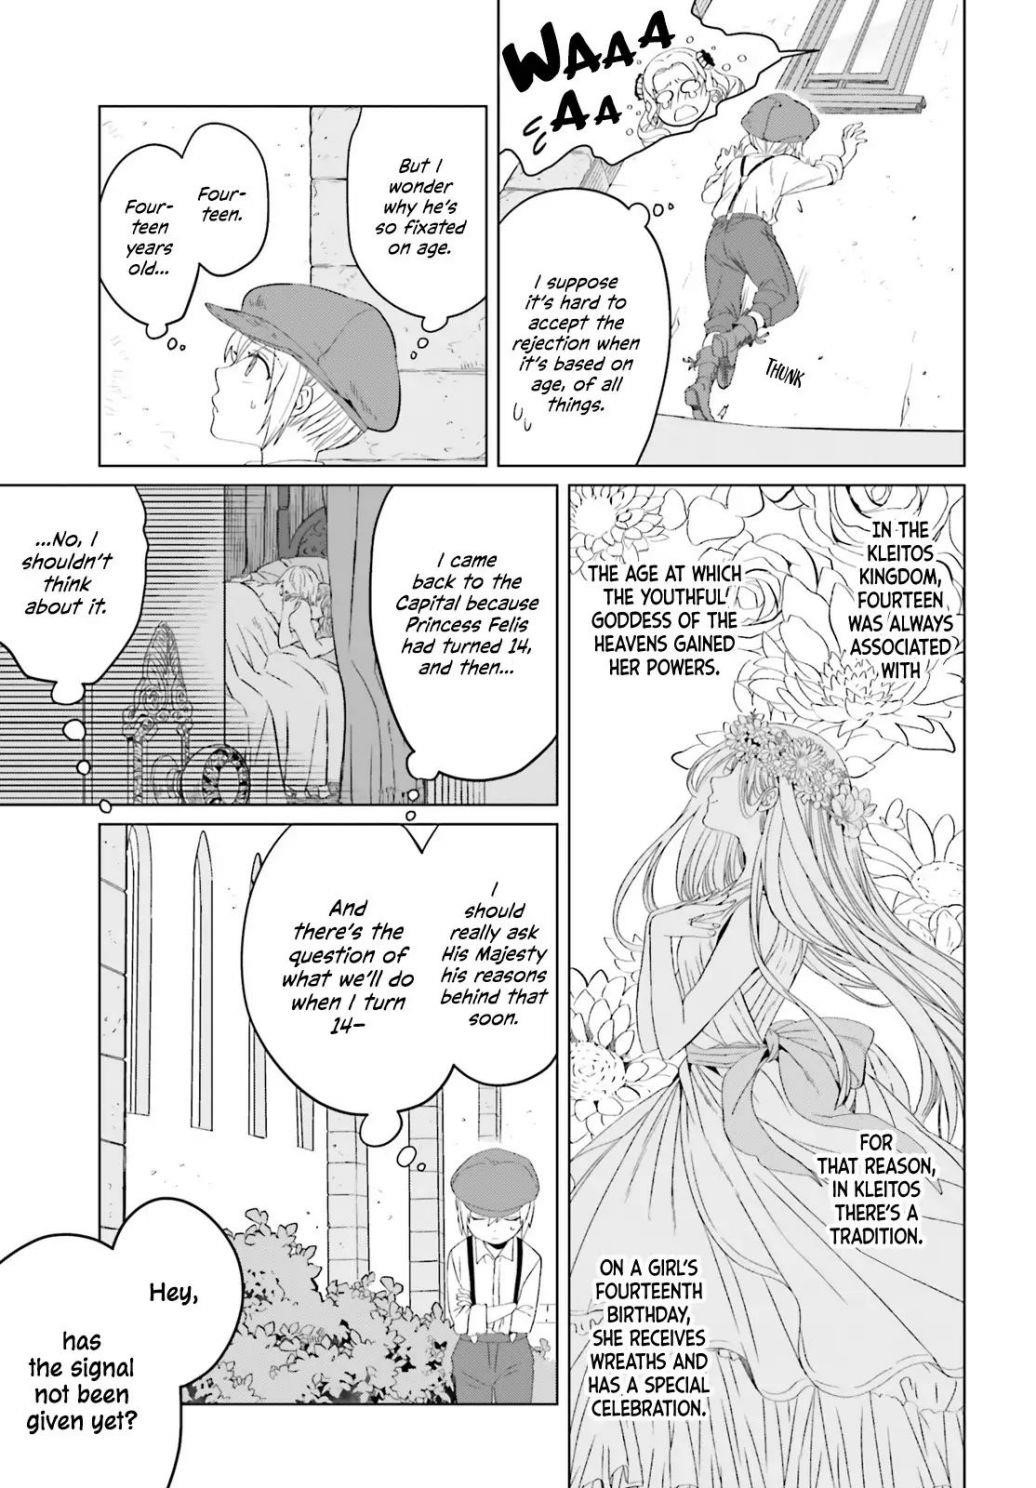 Win Over the Dragon Emperor This Time Around, Noble Girl! Chapter 4 - Page 27